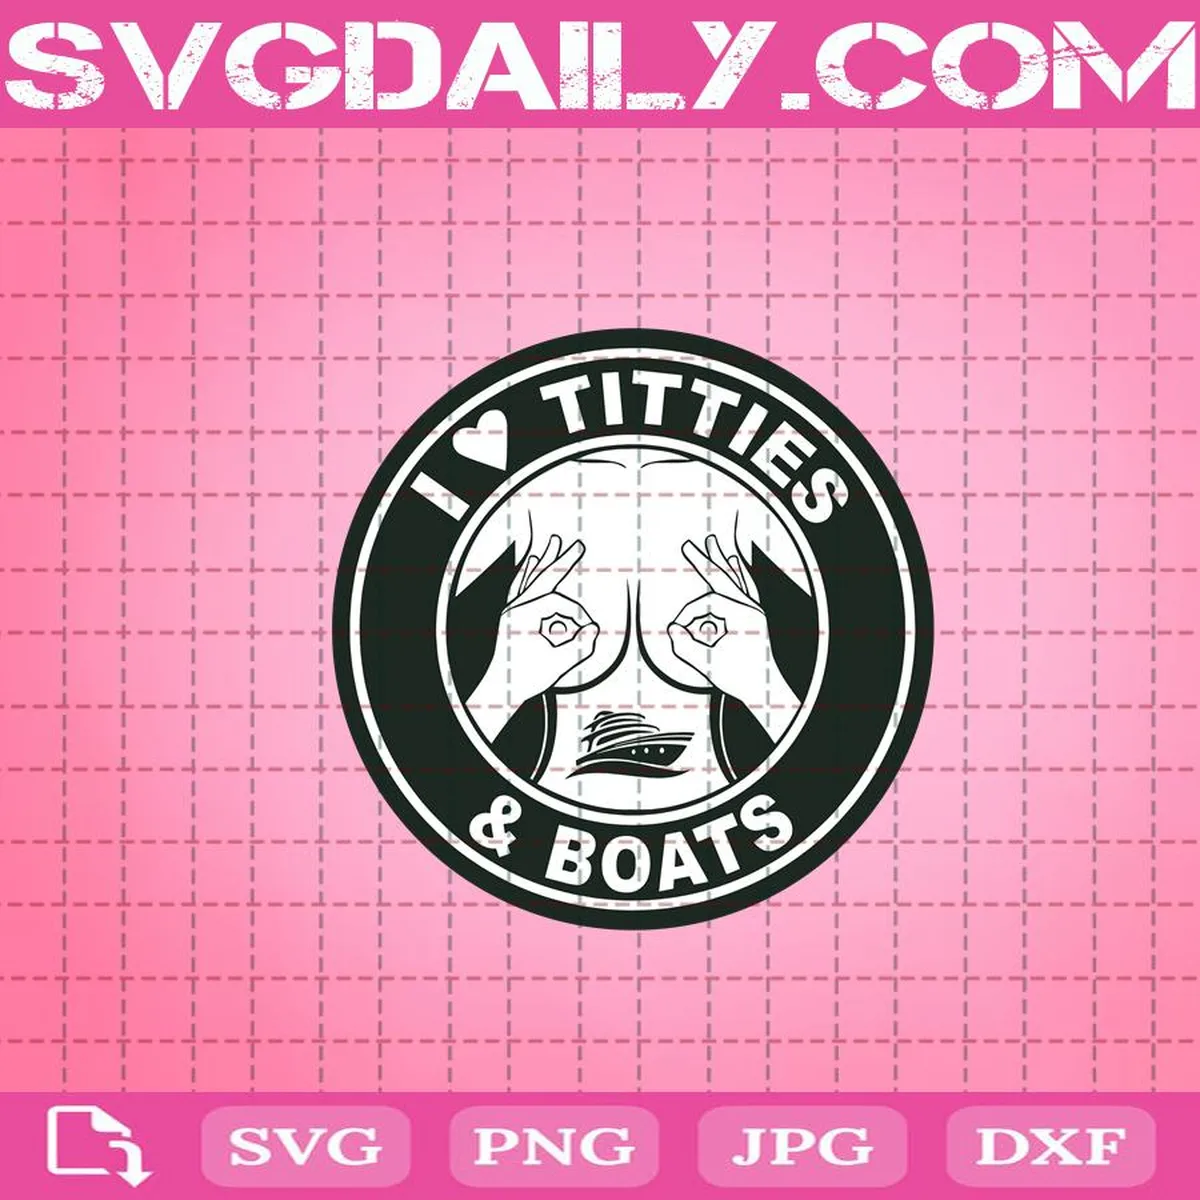 I Love Titties And Boats Svg, Trending Svg, I Love Titties Svg, Love Titties Svg, Boats Svg, Titties And Boats Svg